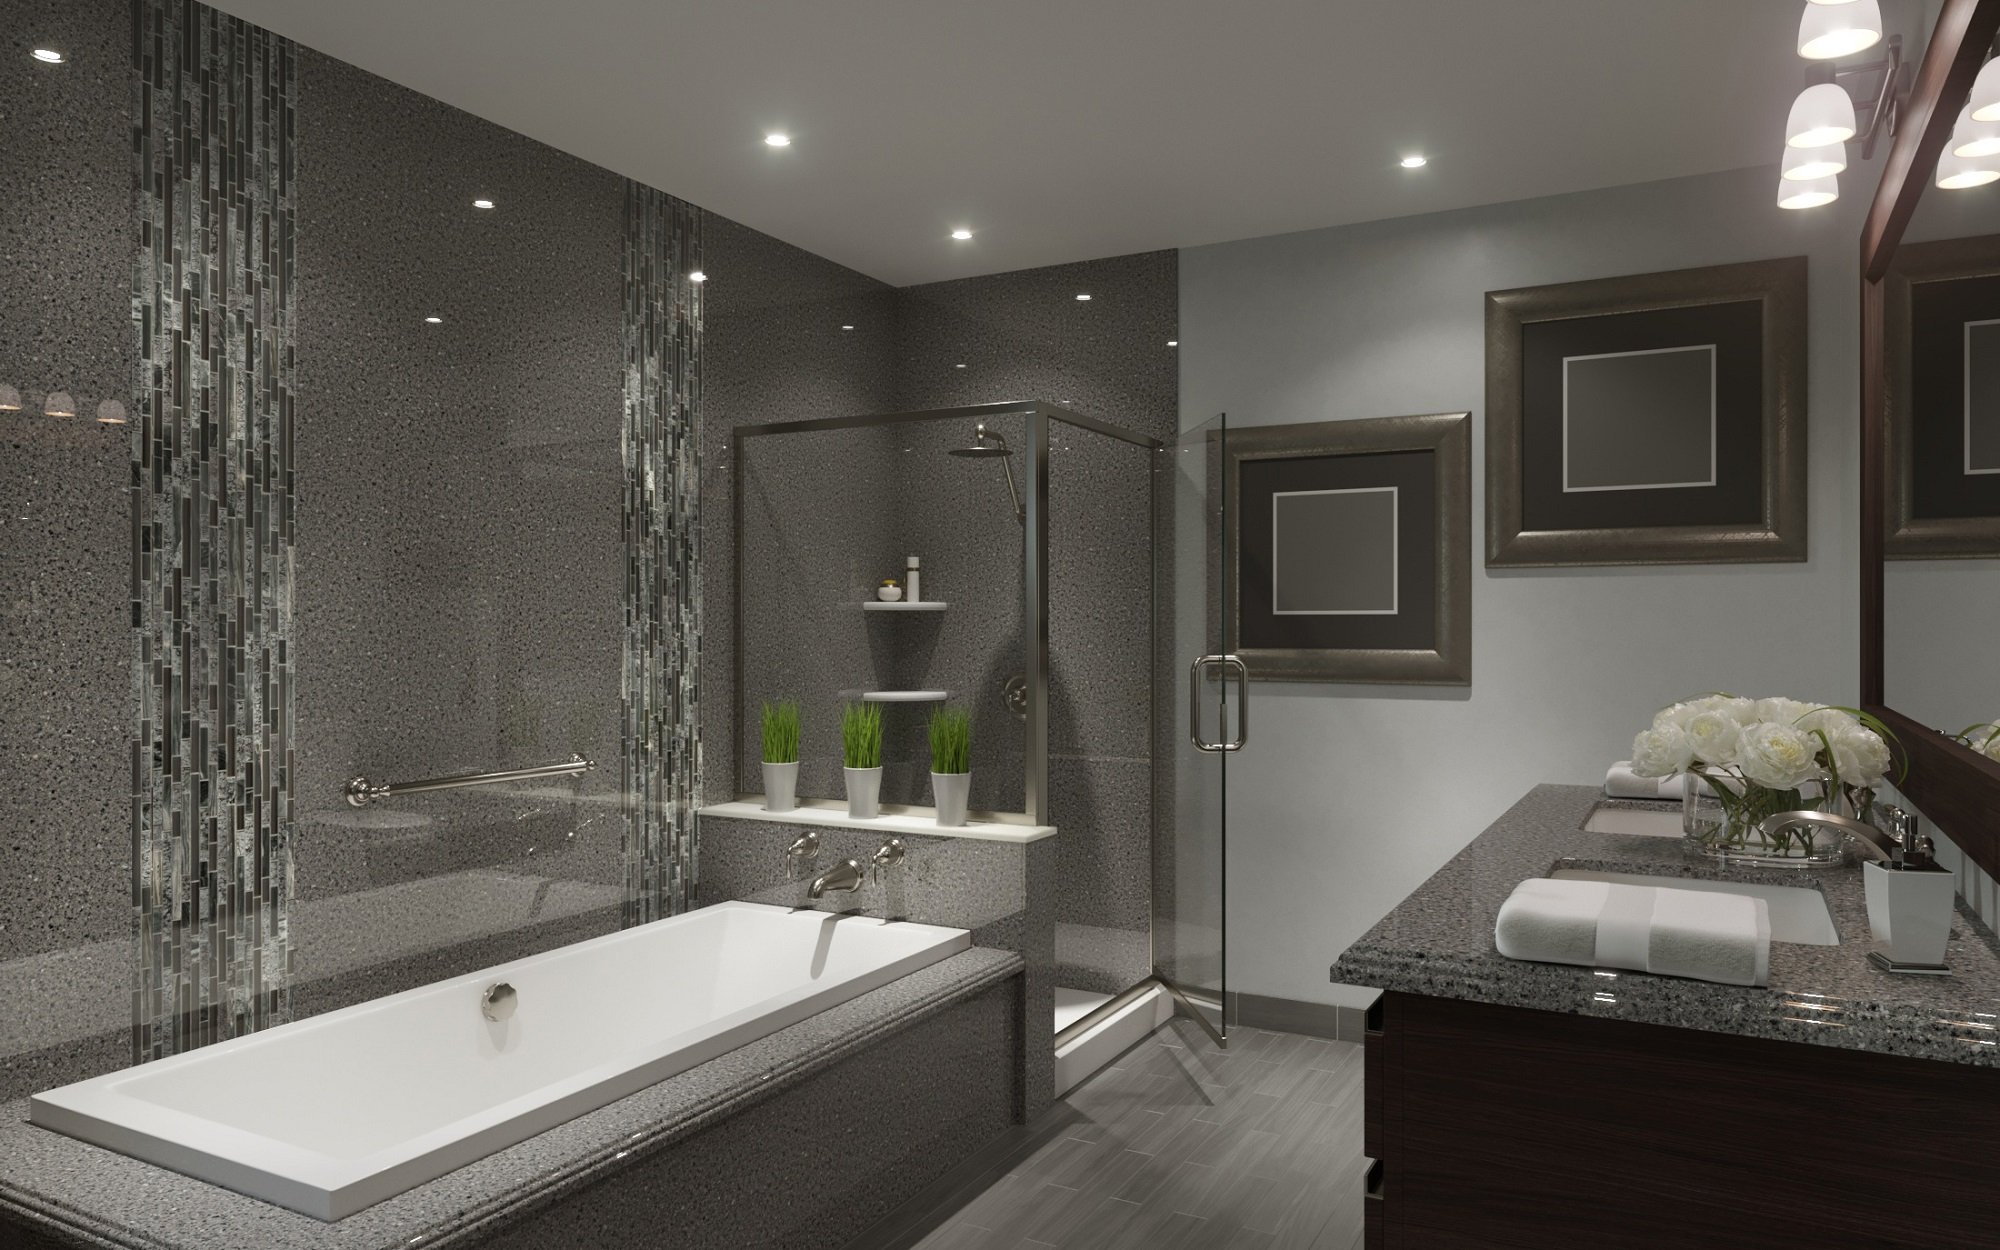 Remodel Your Bathroom With Luxury Shower Units | Call Naperville, IL Pros!